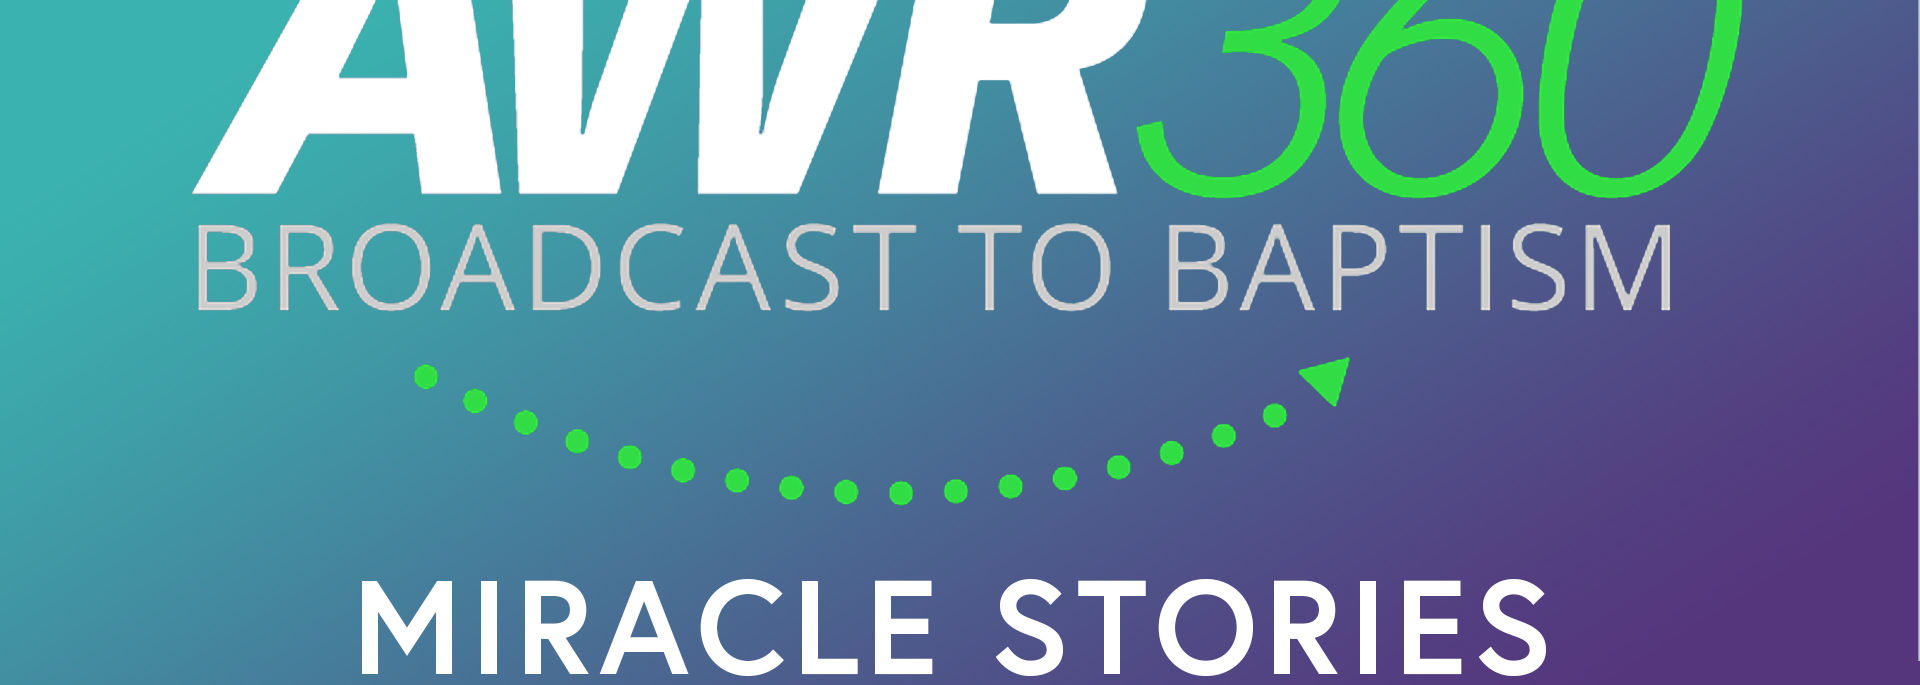 AWR360° Miracle Stories